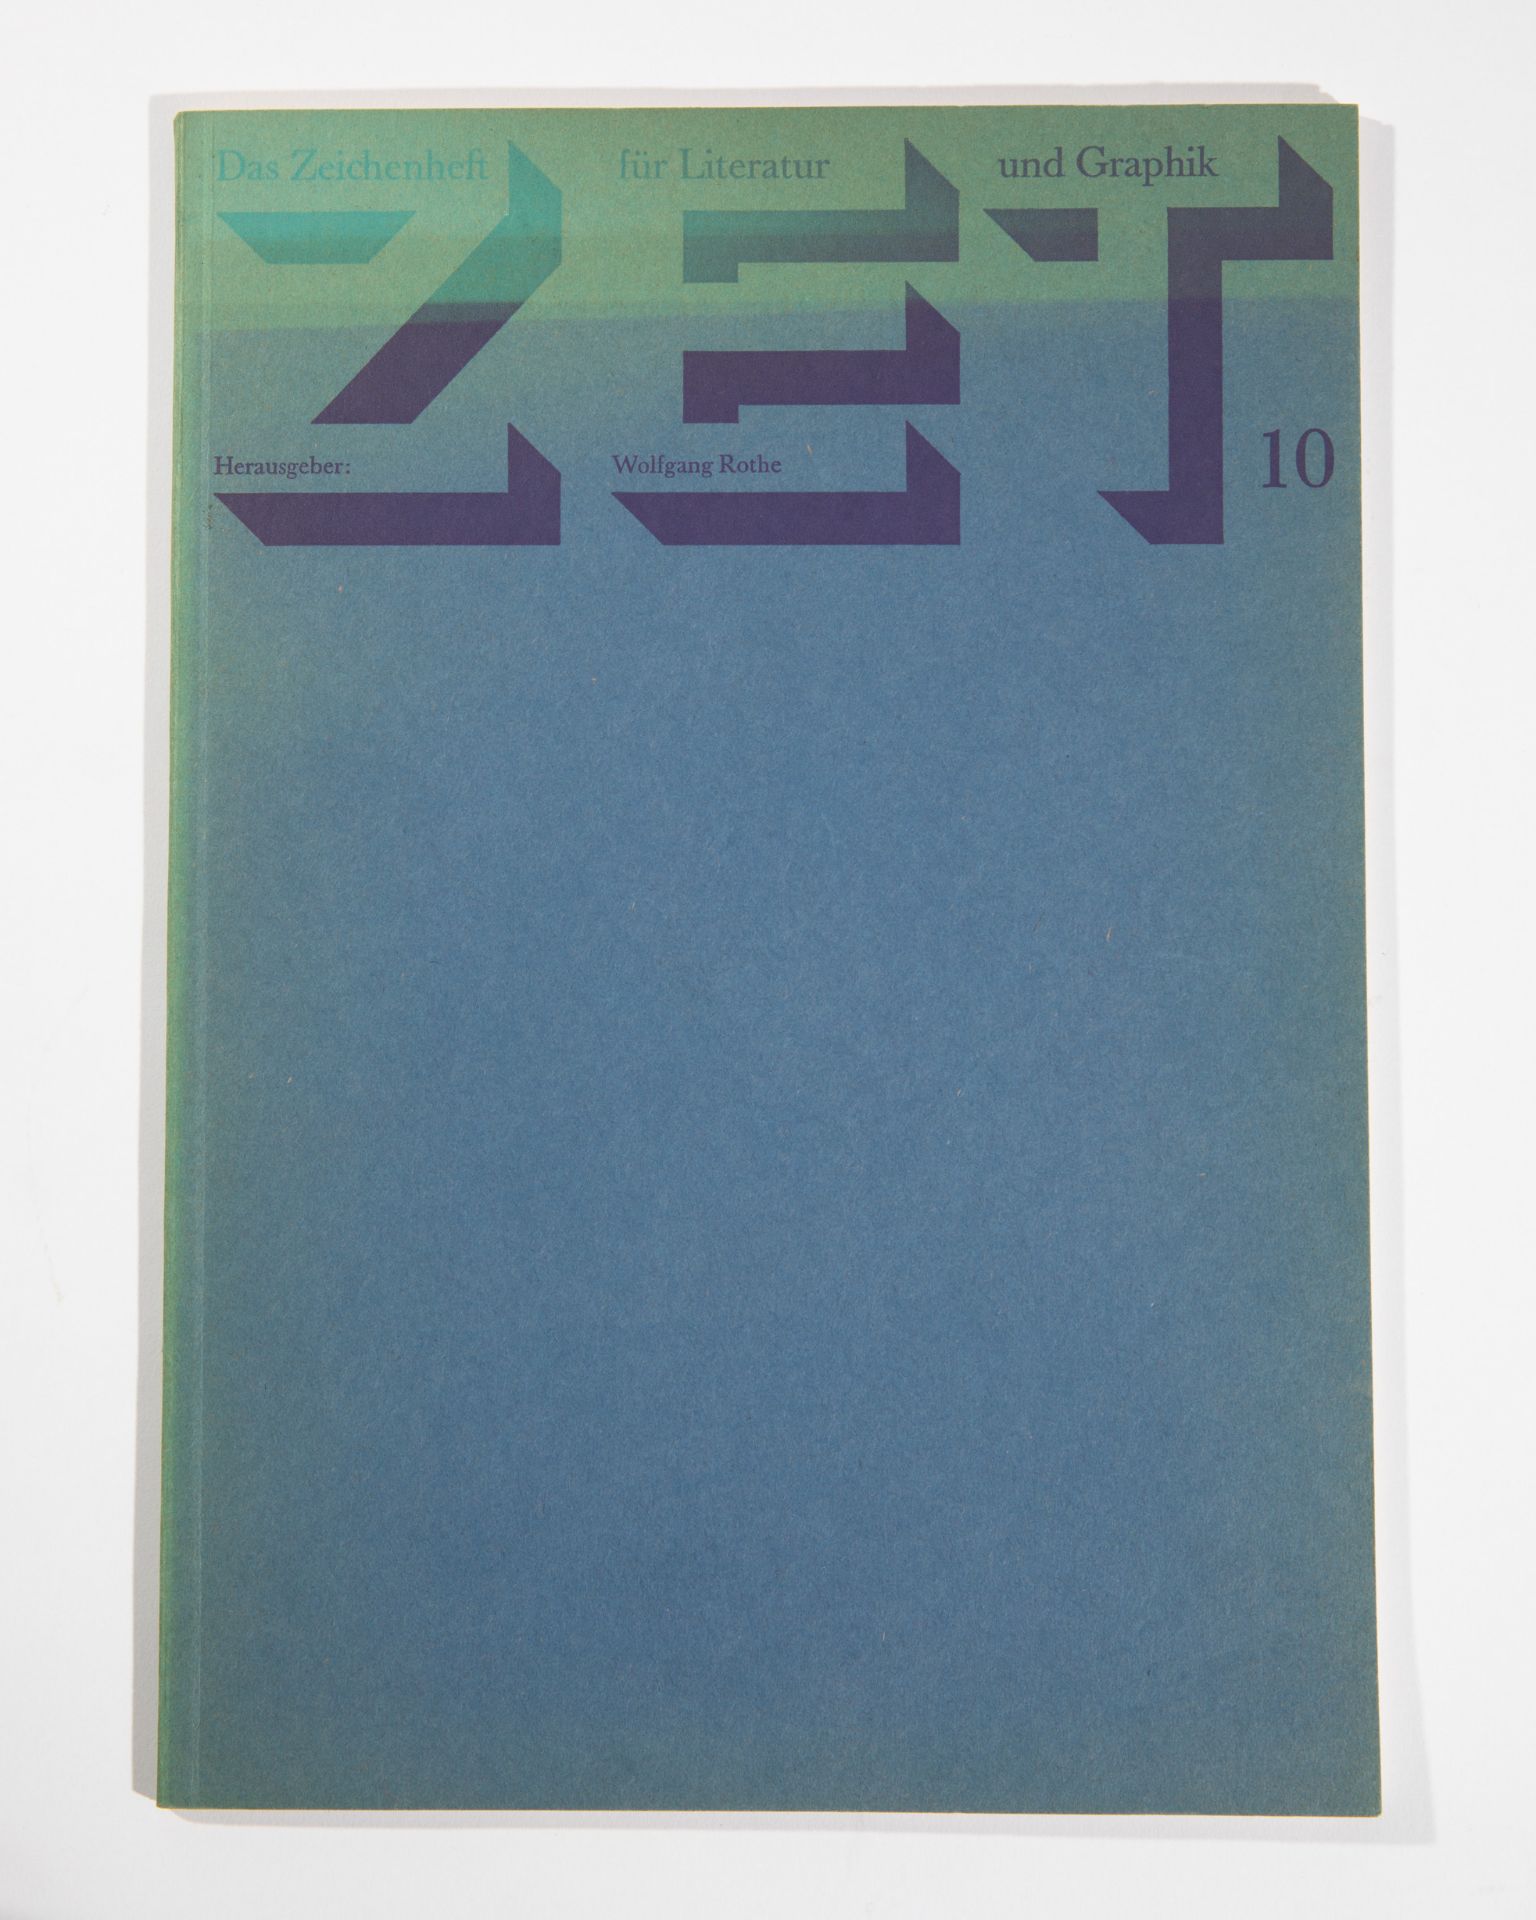 Günther Uecker*, nail head embossing, 1975. In ZET issue 10 - Image 4 of 6